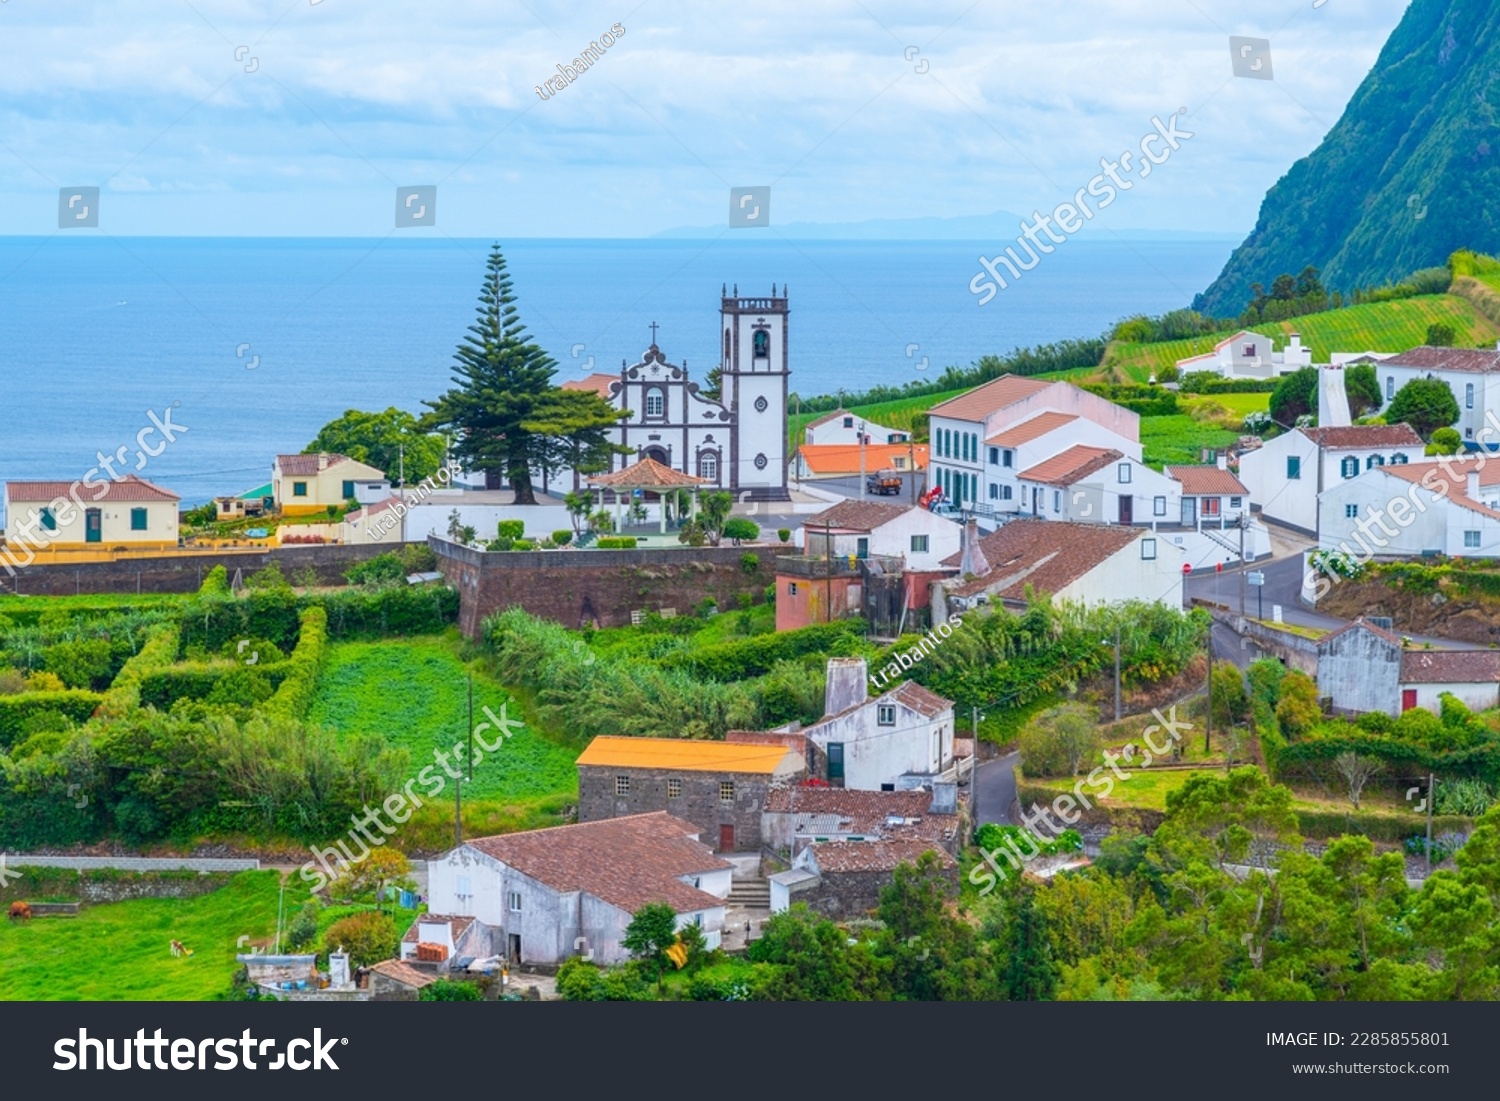 Aerial view of Nordeste town at Sao Miguel island, Azores Portugal. #2285855801